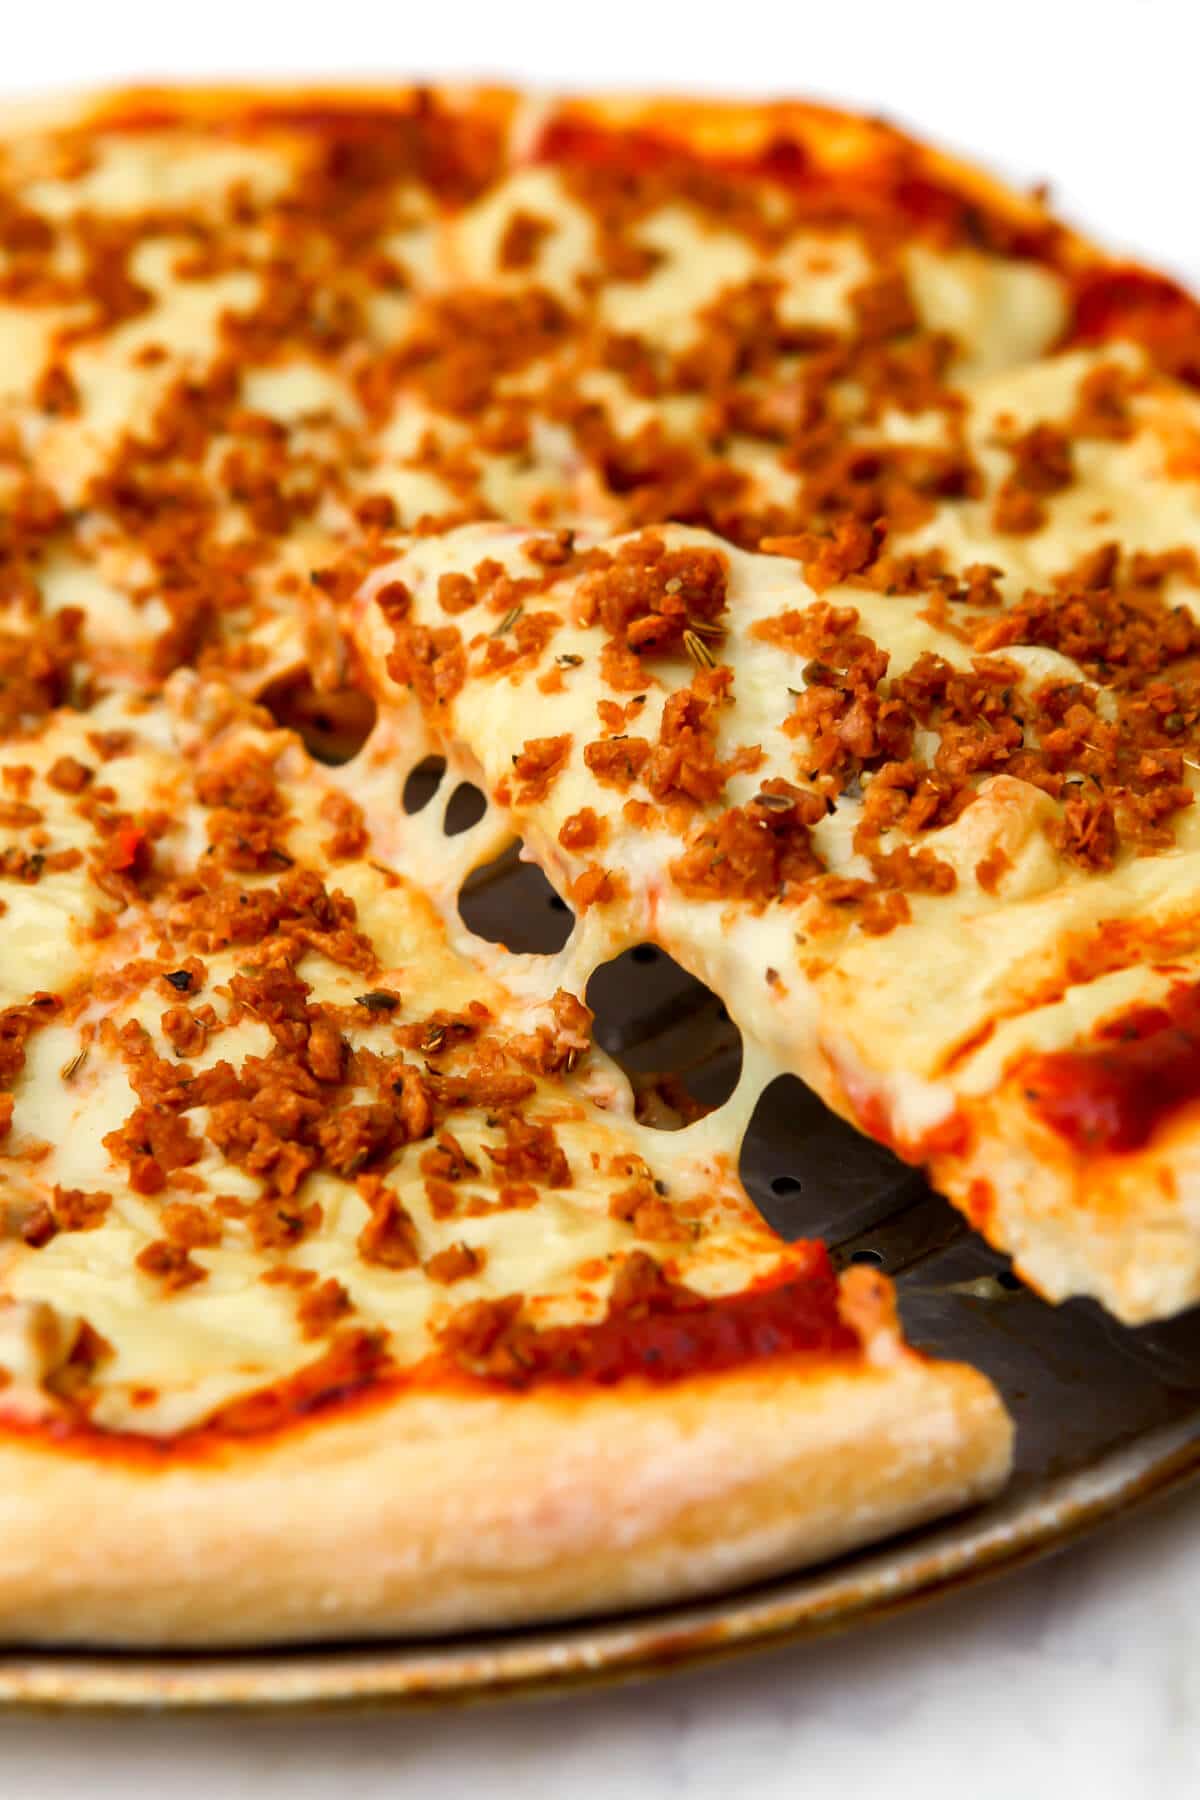 A vegan pizza topped with Italian style vegan sausage crumbles made with TVP.